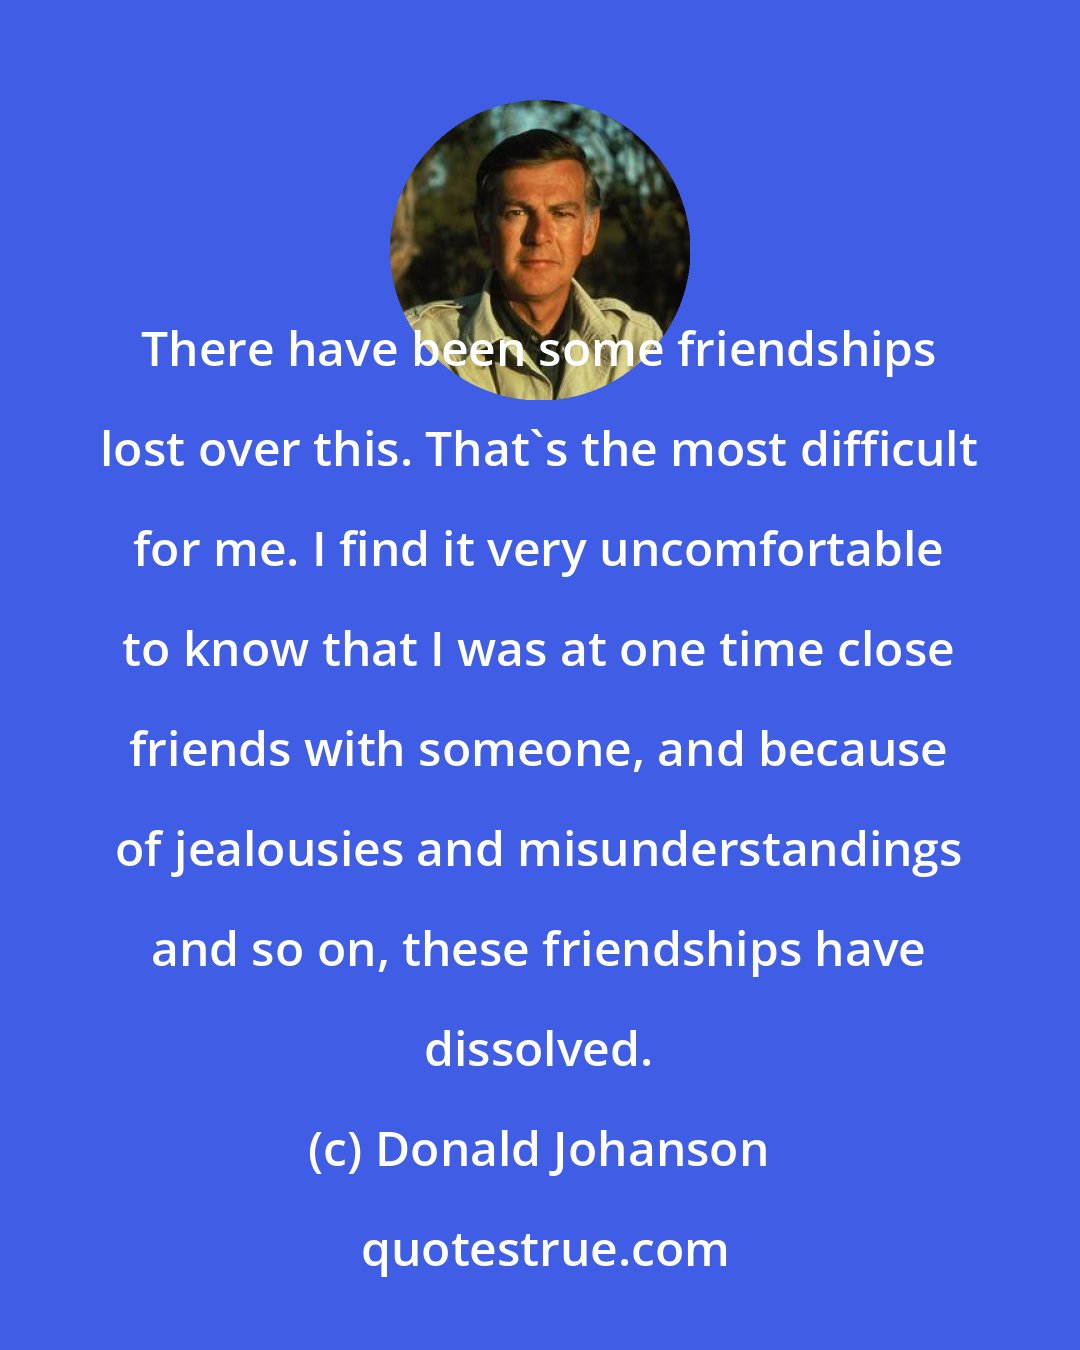 Donald Johanson: There have been some friendships lost over this. That's the most difficult for me. I find it very uncomfortable to know that I was at one time close friends with someone, and because of jealousies and misunderstandings and so on, these friendships have dissolved.